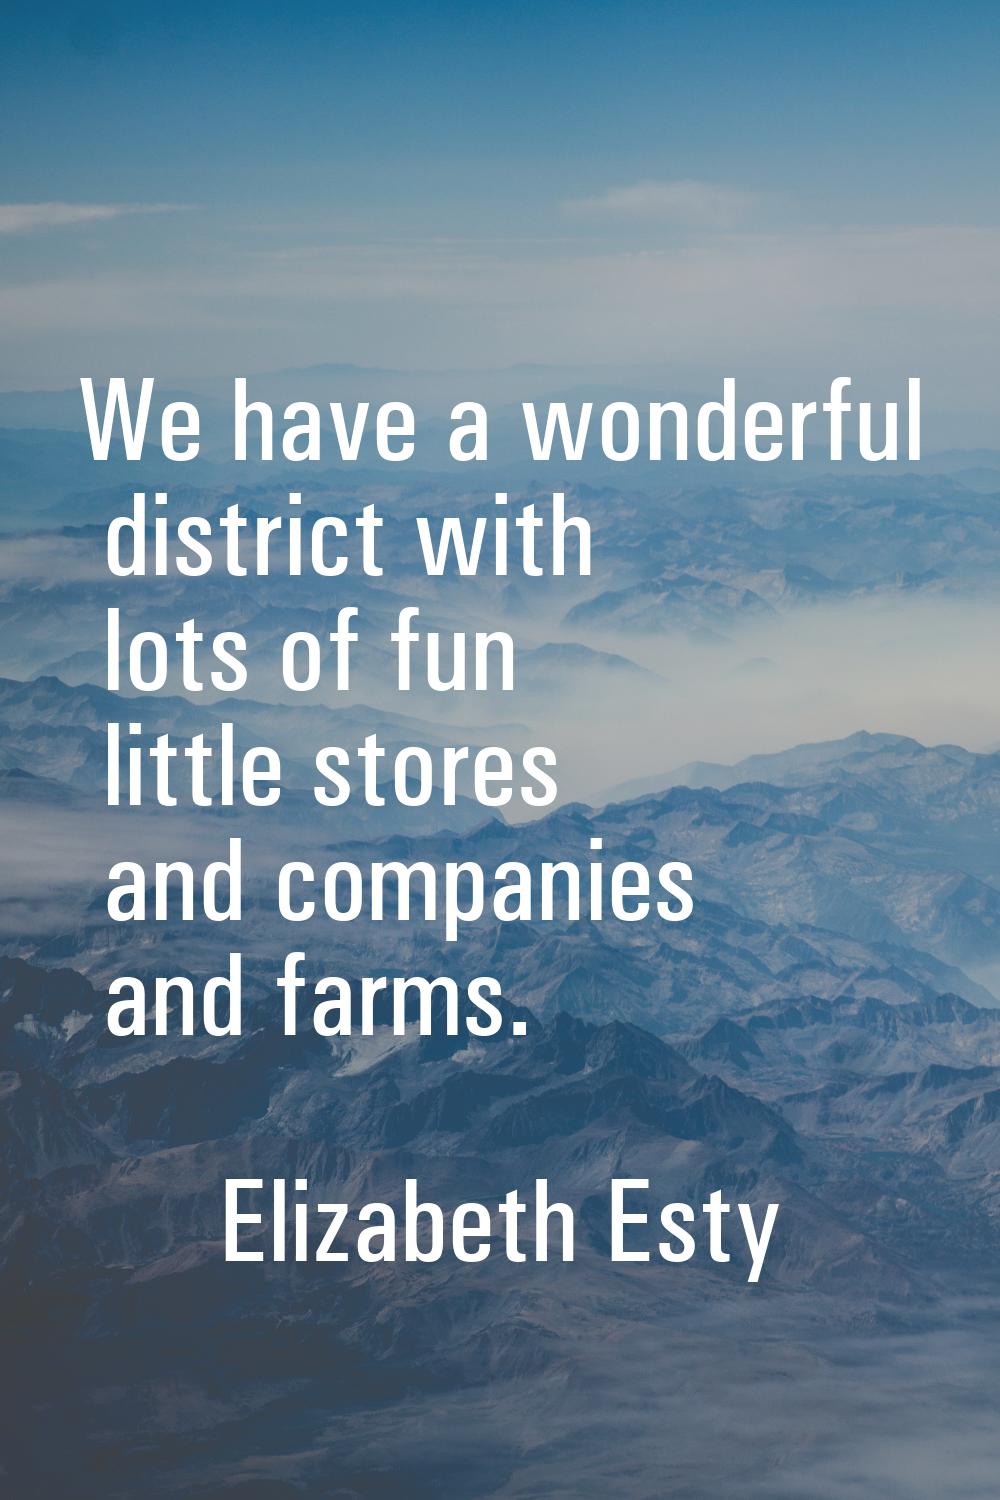 We have a wonderful district with lots of fun little stores and companies and farms.